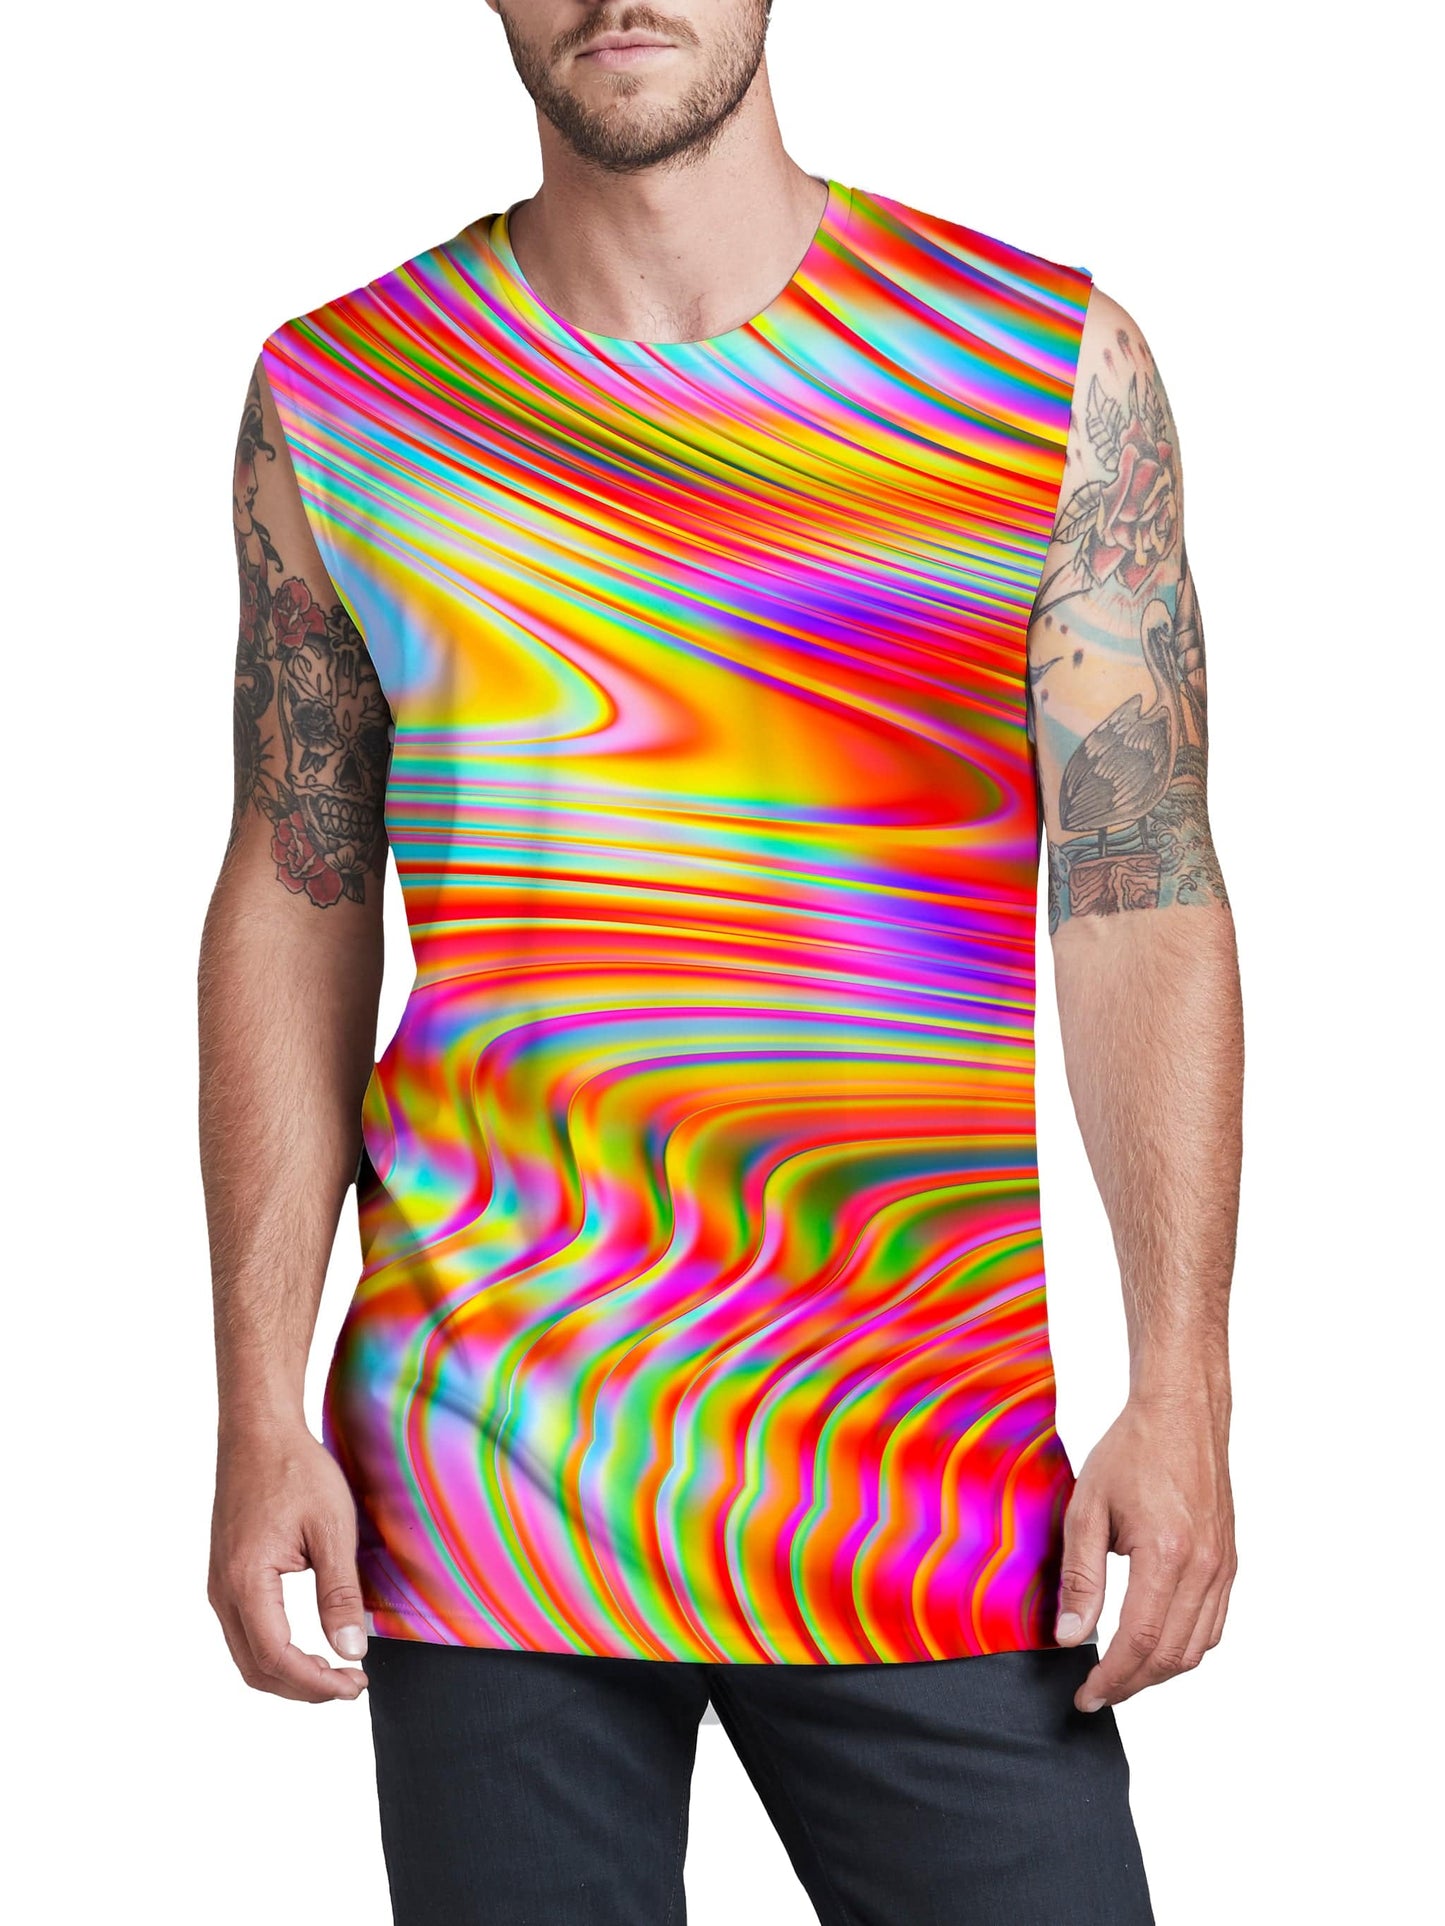 Afternoon Delight Men's Muscle Tank, Art Design Works, | iEDM